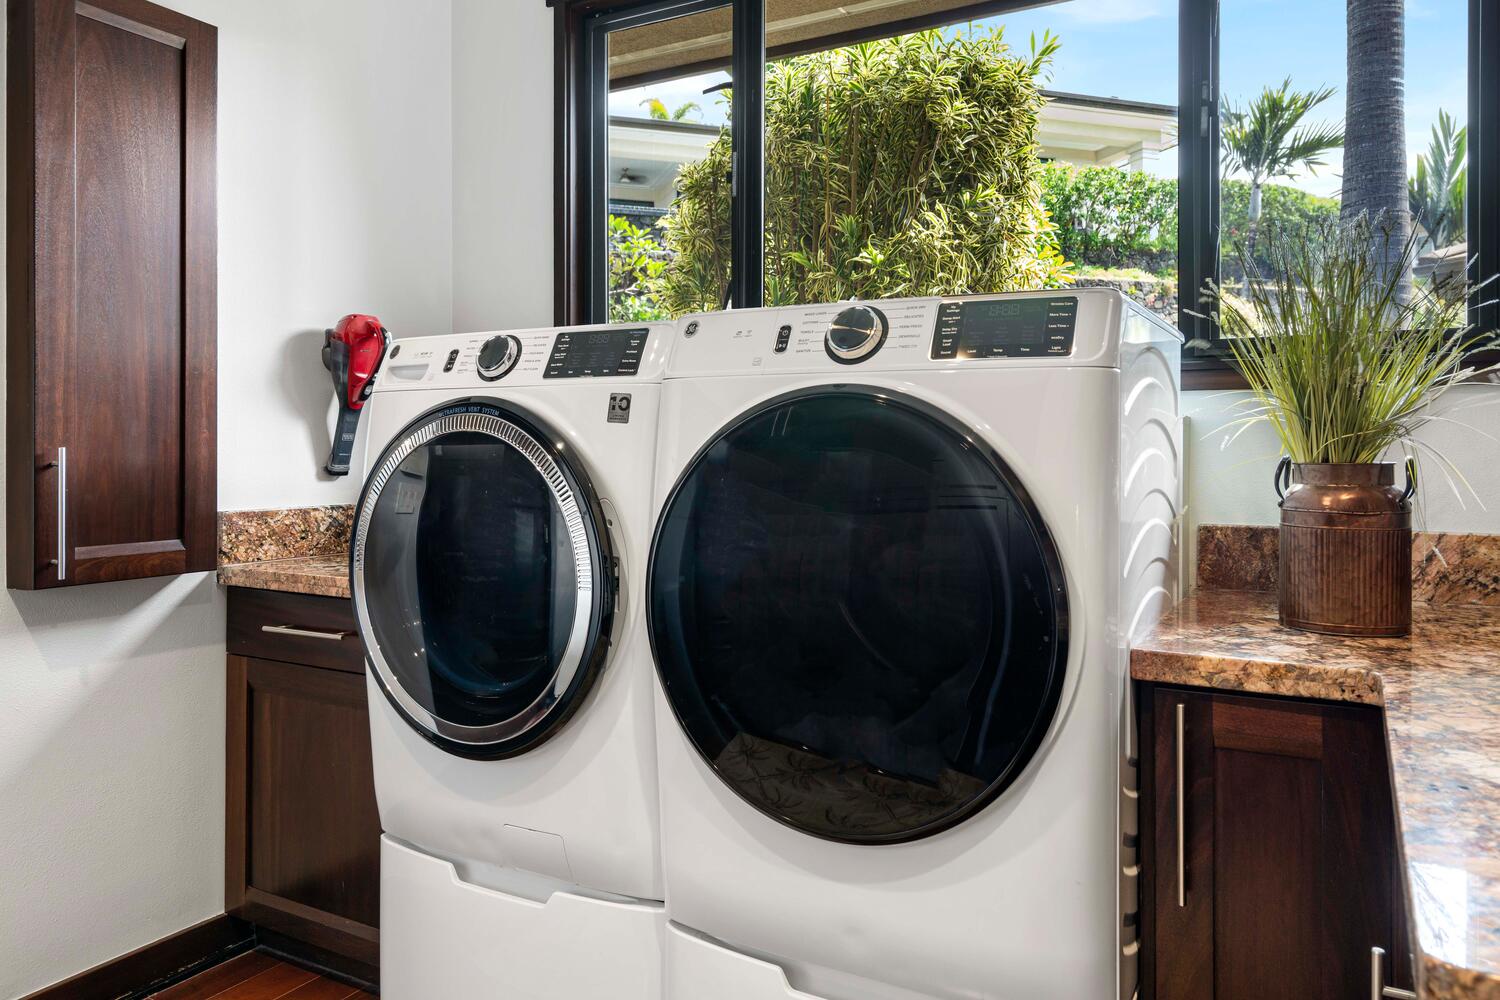 Kailua Kona Vacation Rentals, Island Oasis - Full sized laundry for your convenience